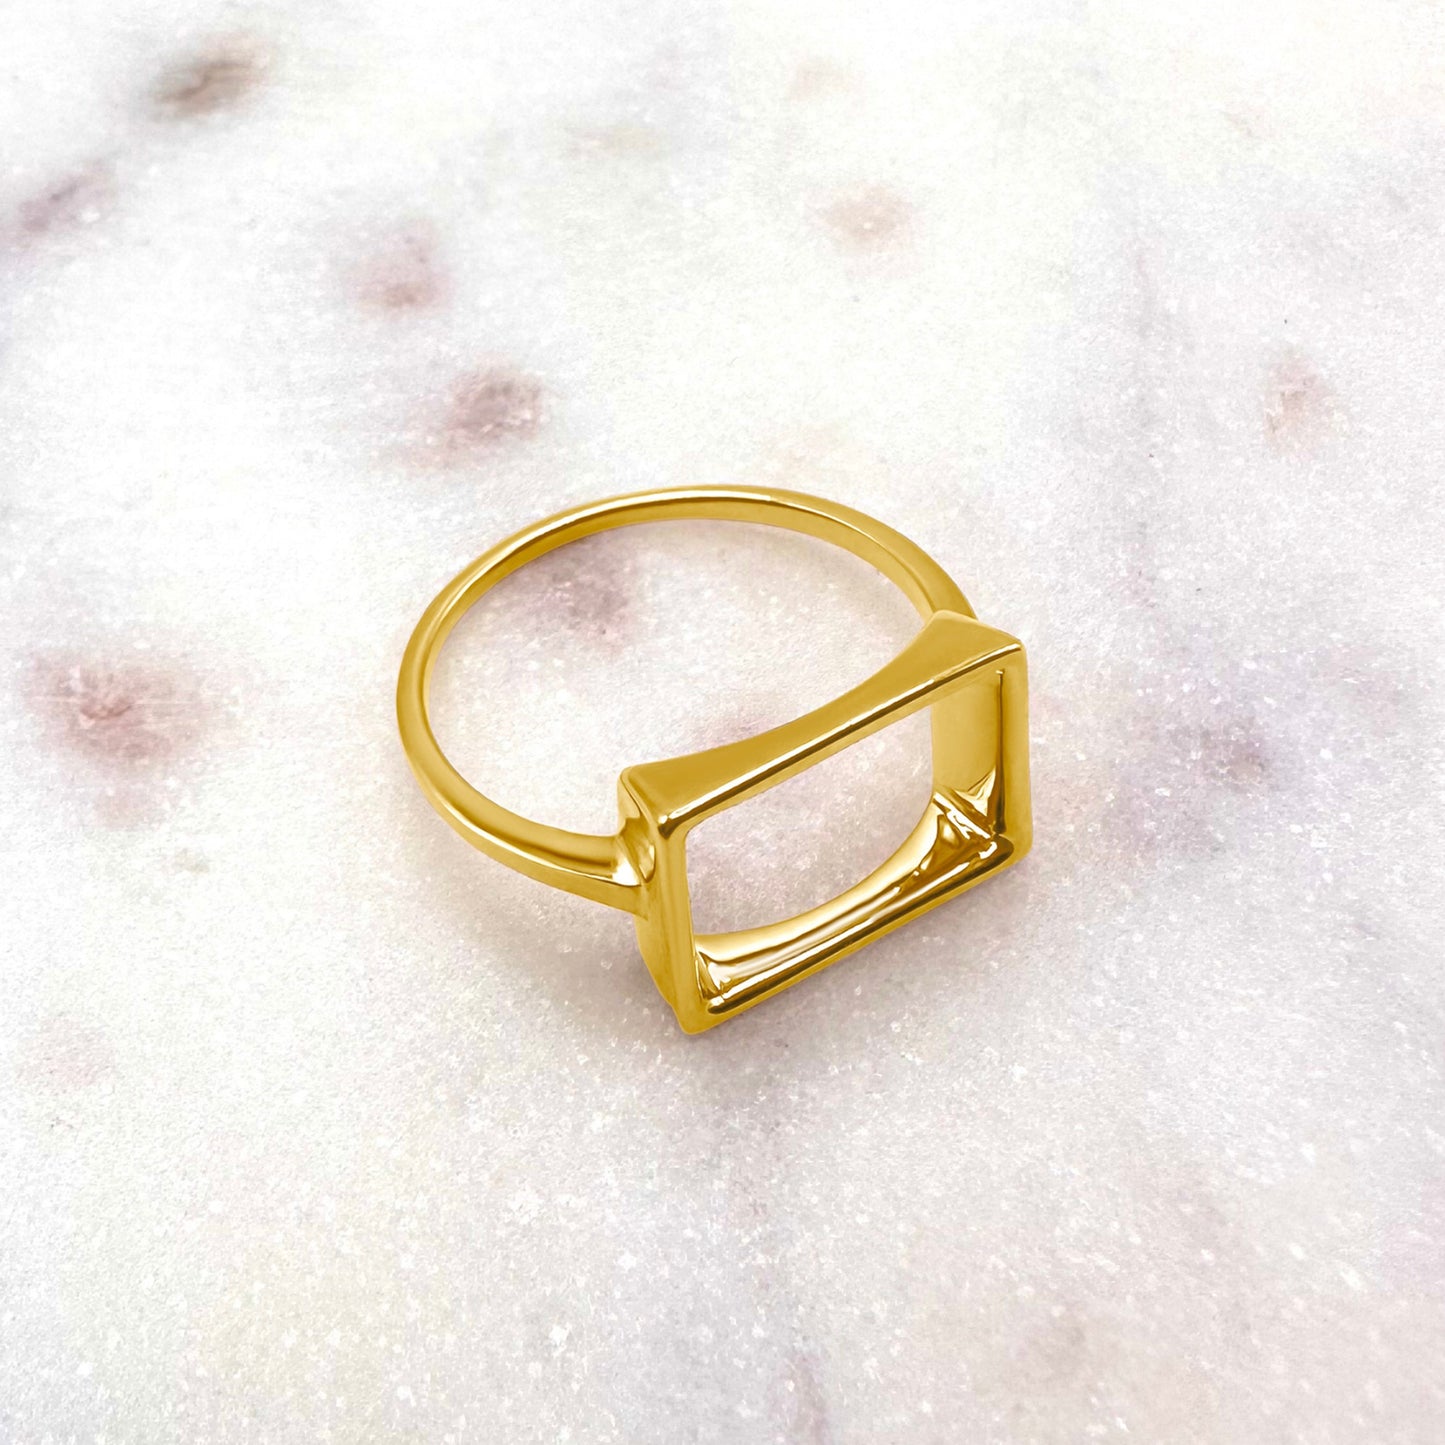 Séchic 14k Open Space Rectangle Centered Gold Ring 6